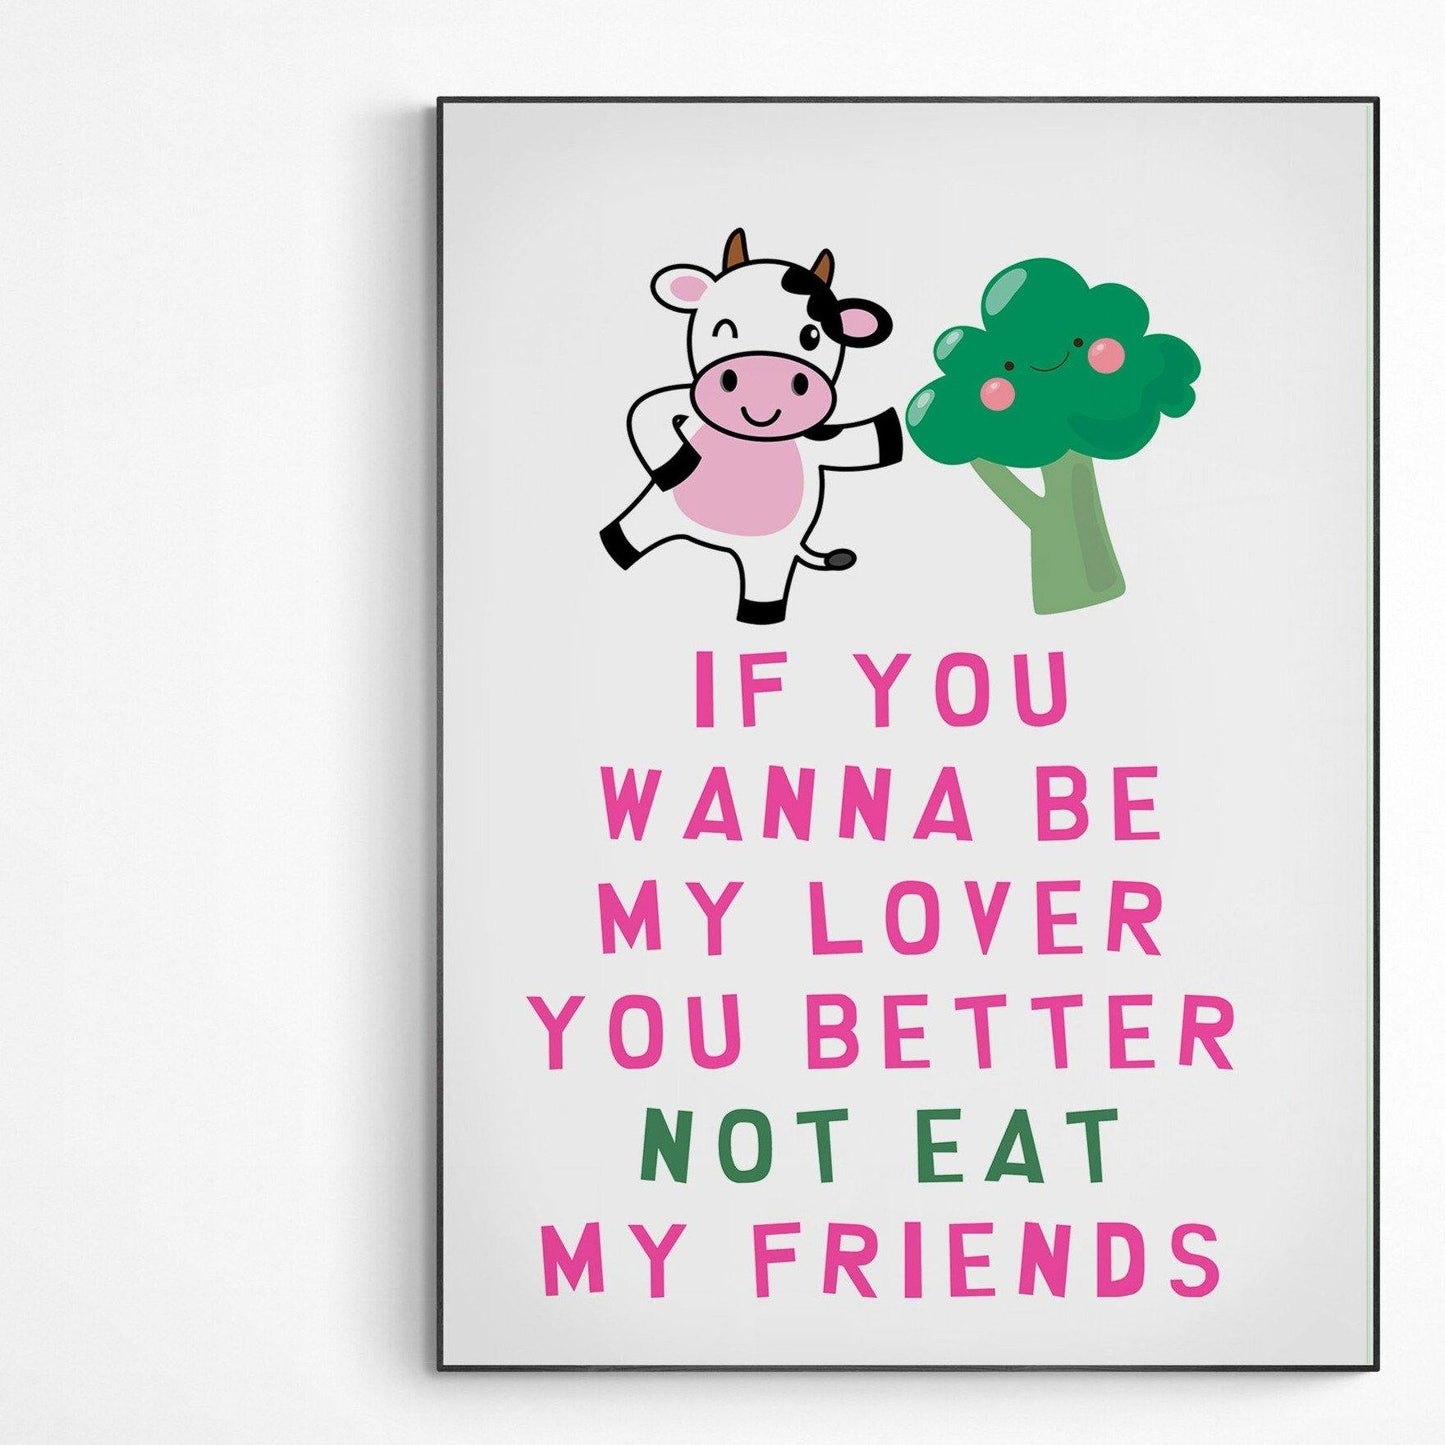 If you wannabe my lover you better not eat my friend Poster |  Kitchen Decor Print Art | Motivational Poster Wall Art Decor | Greeting Card Gifts | Variety Sizes